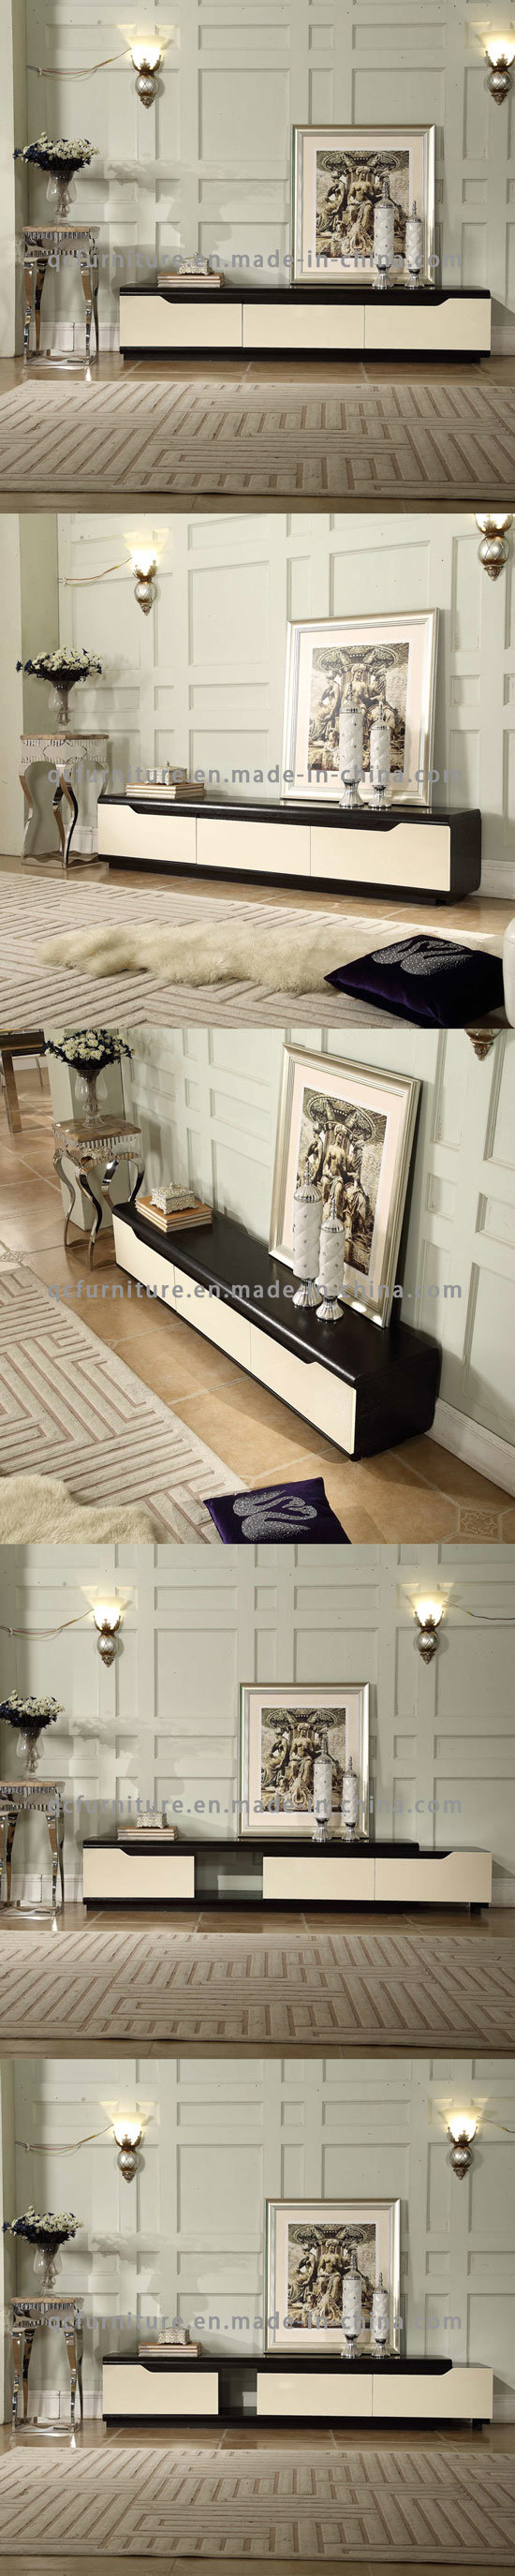 Most Popular New Design Wooden Coffee Table with Function